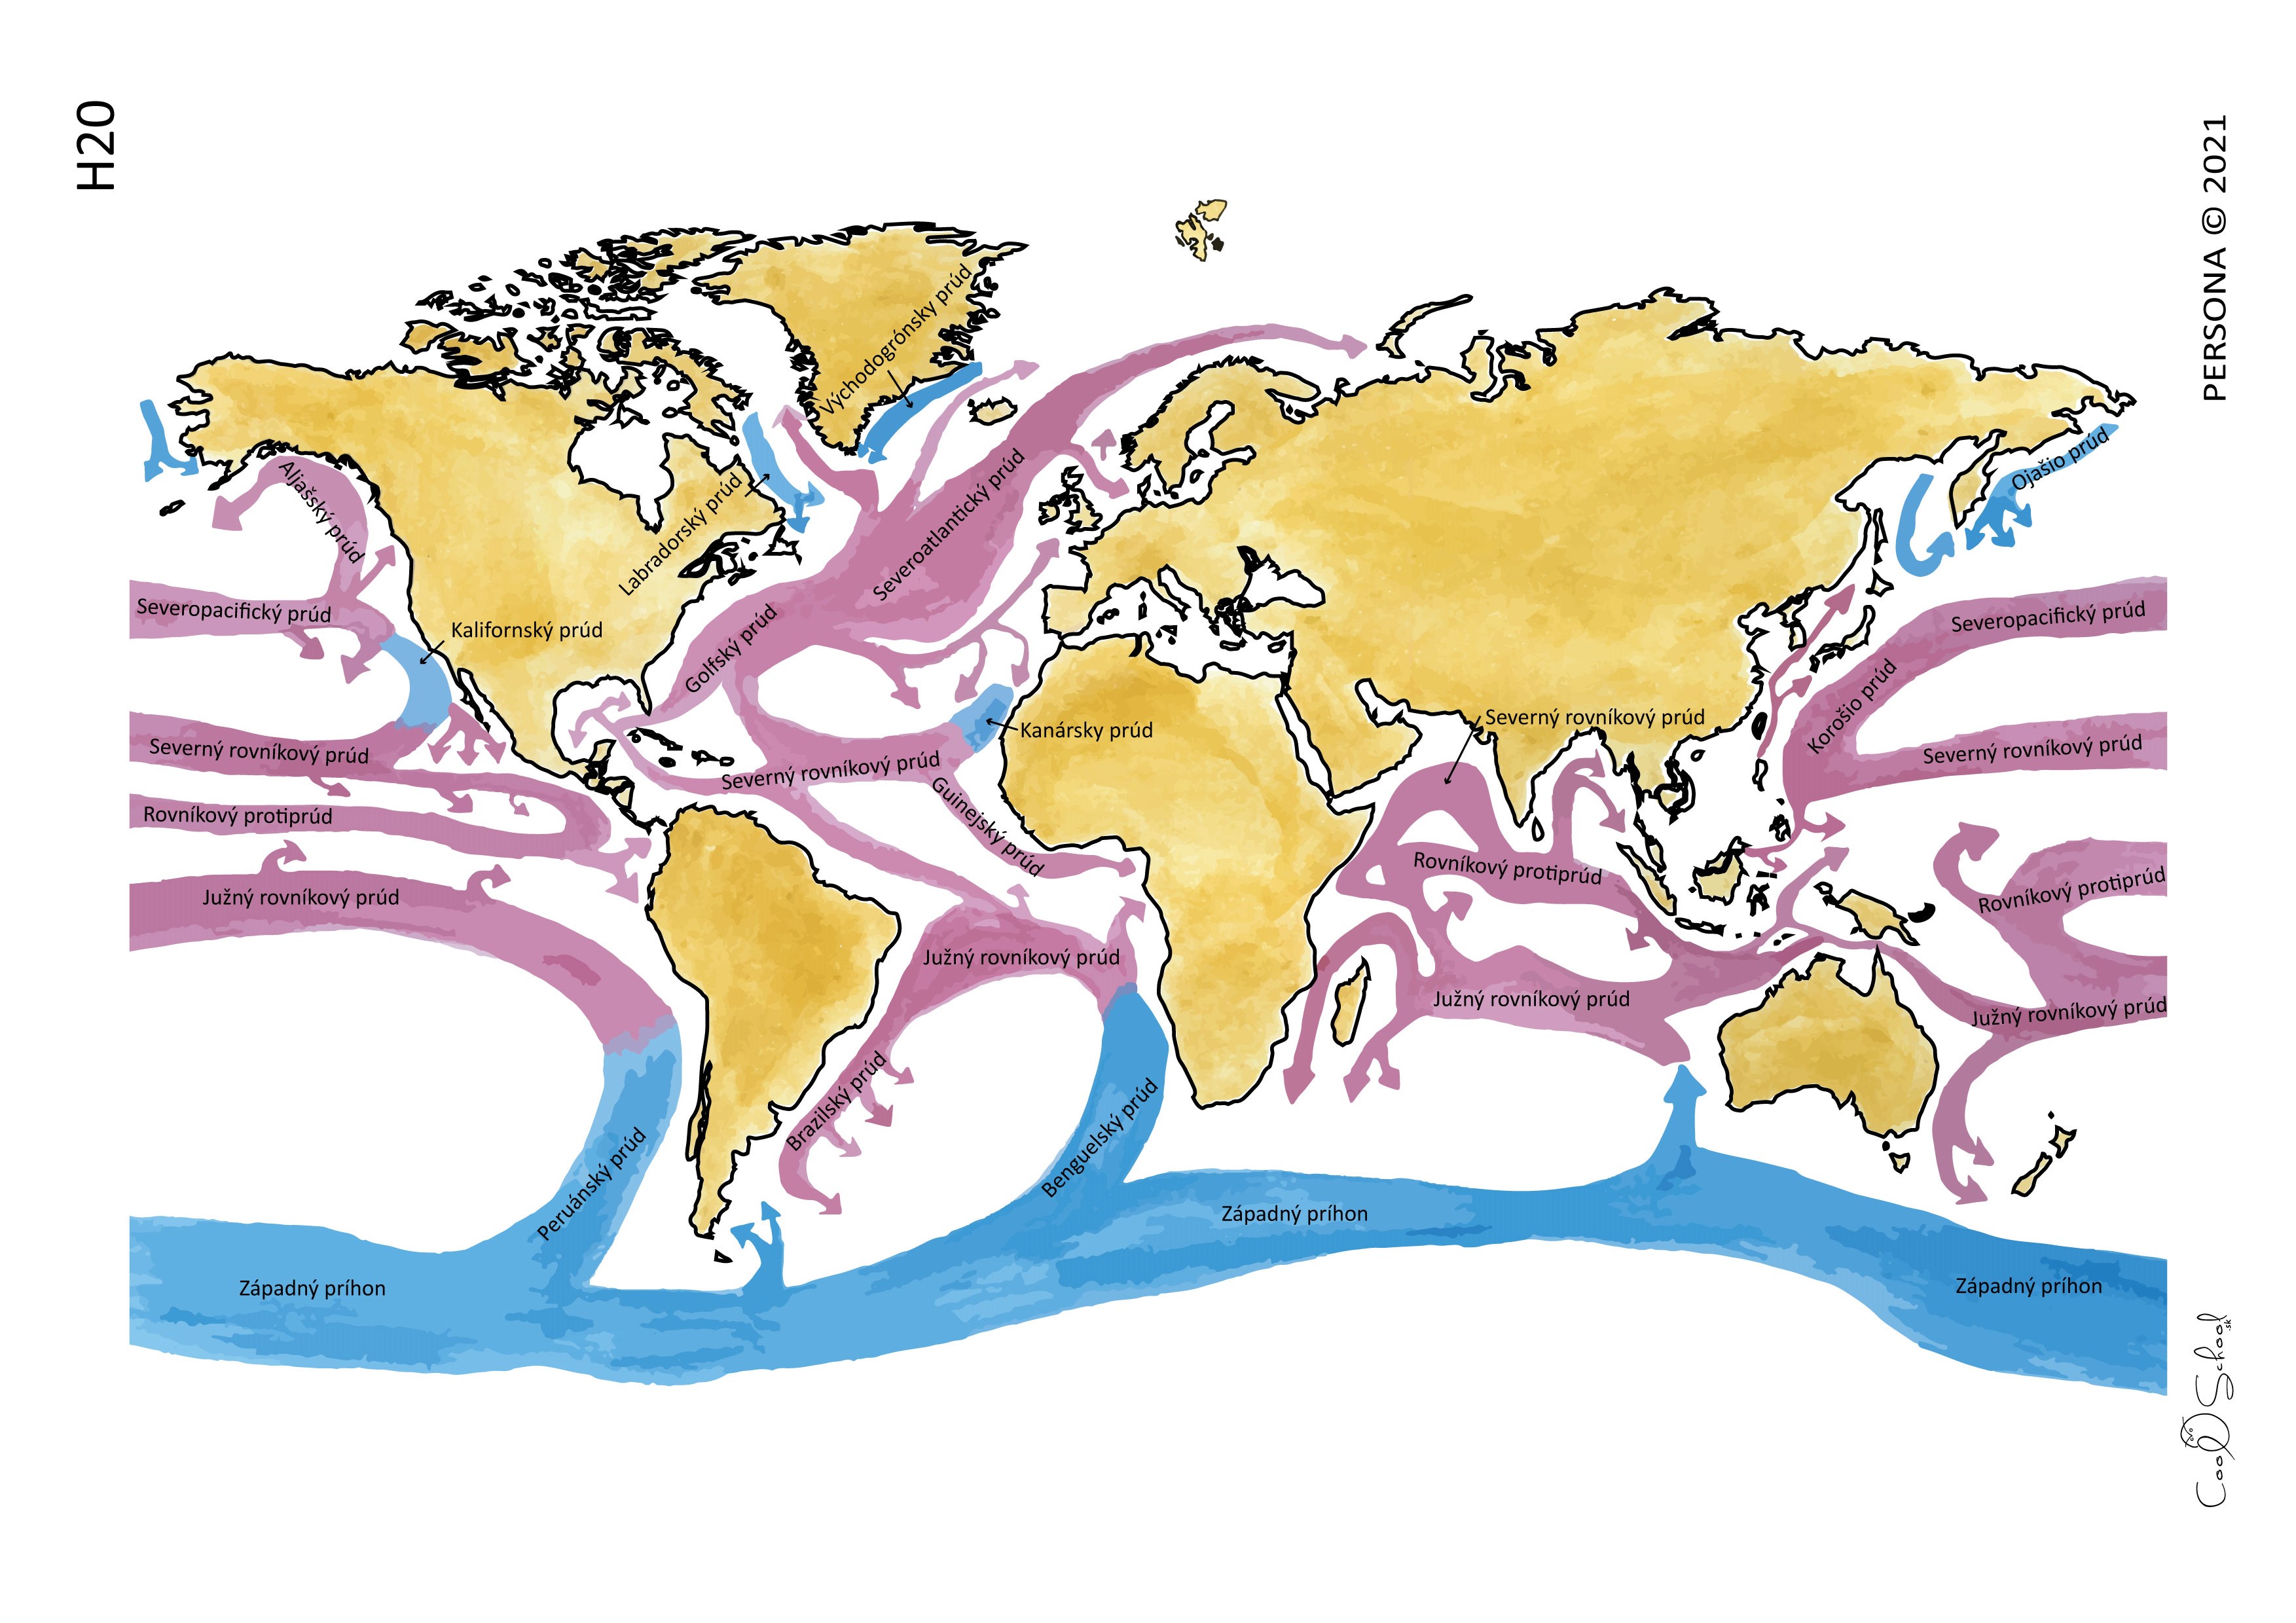 Names of Marine Currents / Important Nomenclature of Marine Currents